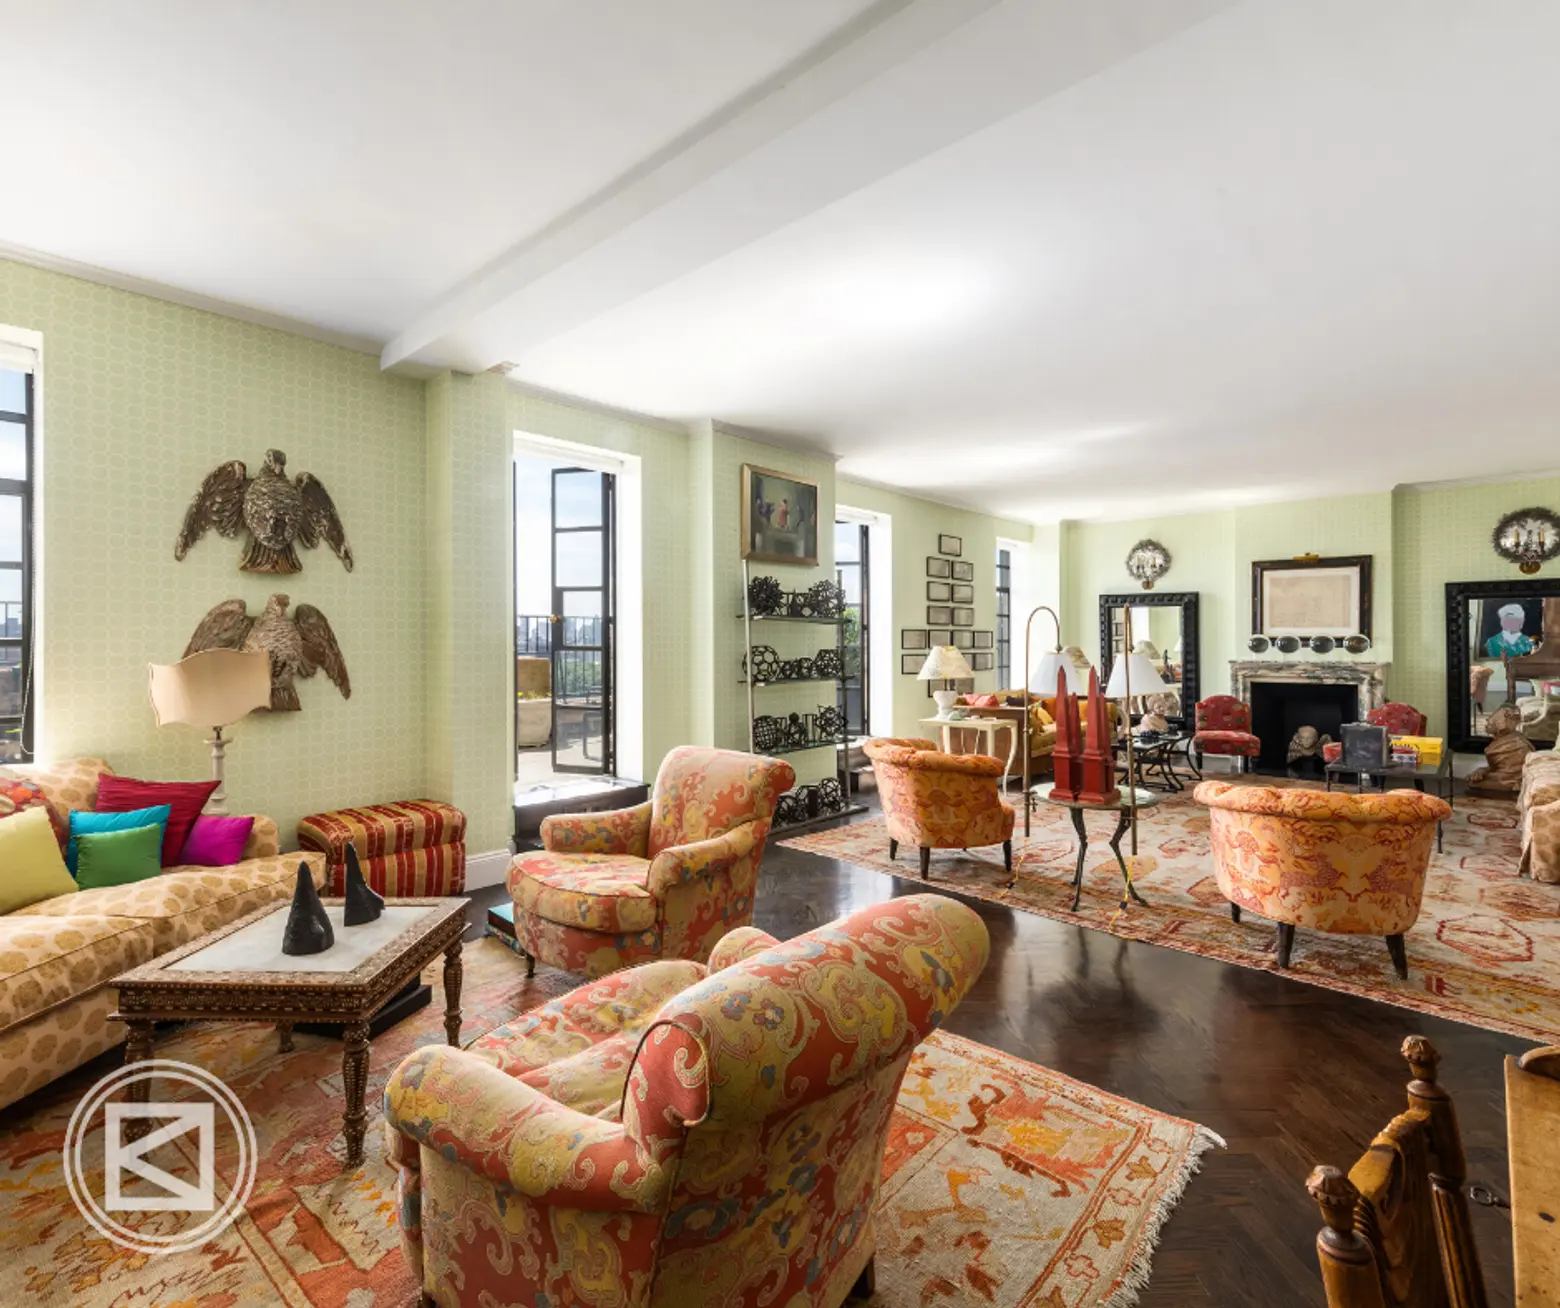 At the Upper West Side’s iconic El Dorado, a $20M duplex with iconic Central Park views